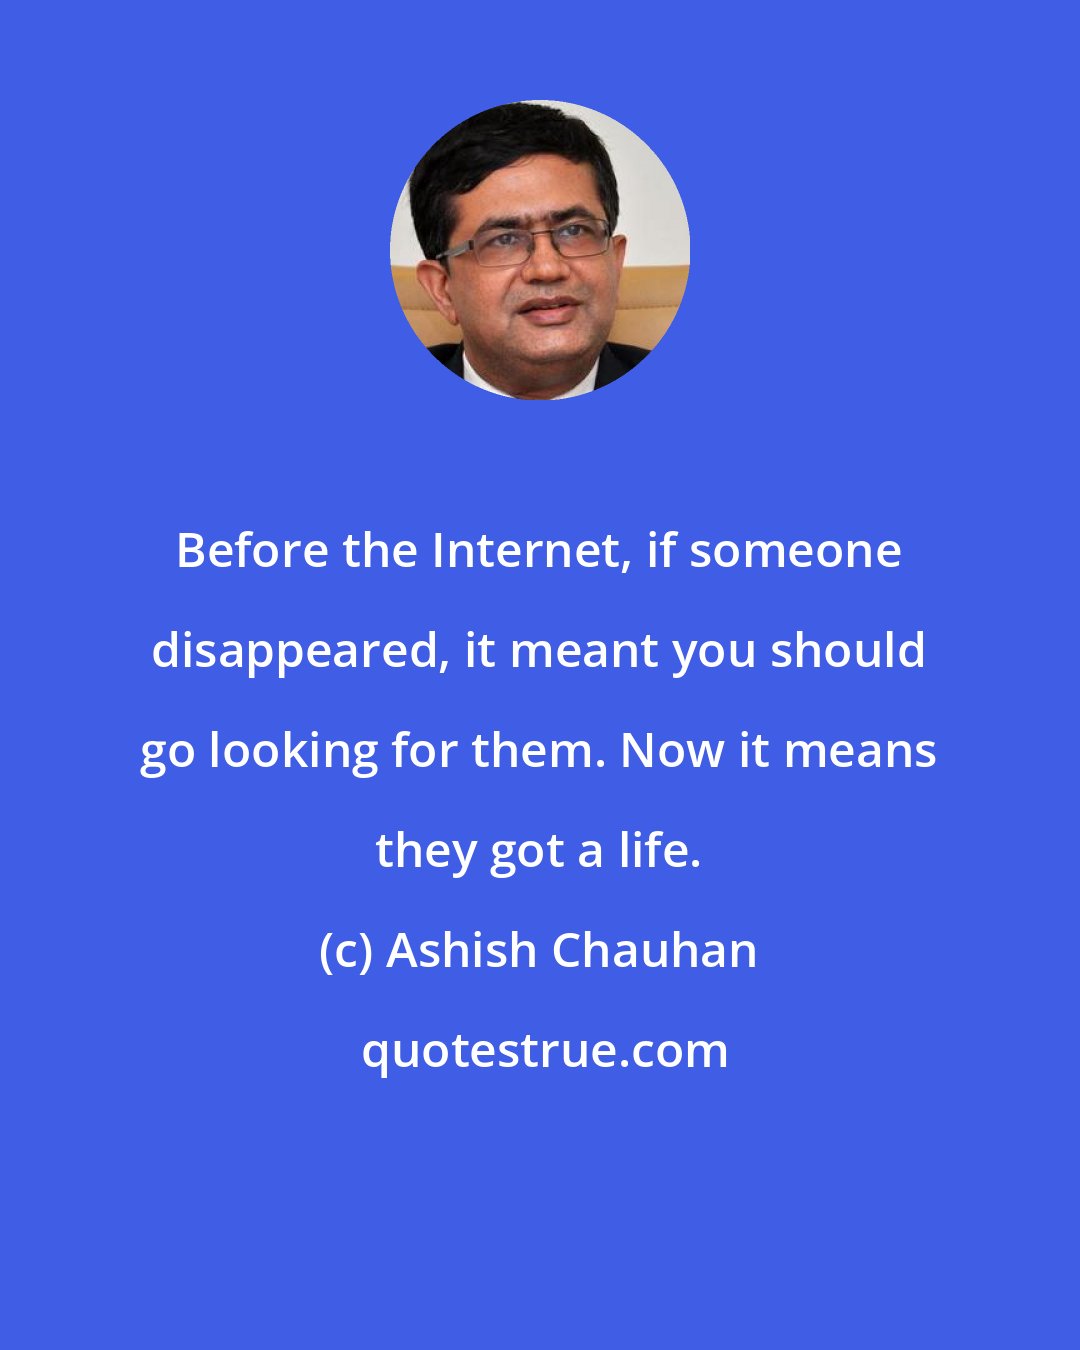 Ashish Chauhan: Before the Internet, if someone disappeared, it meant you should go looking for them. Now it means they got a life.